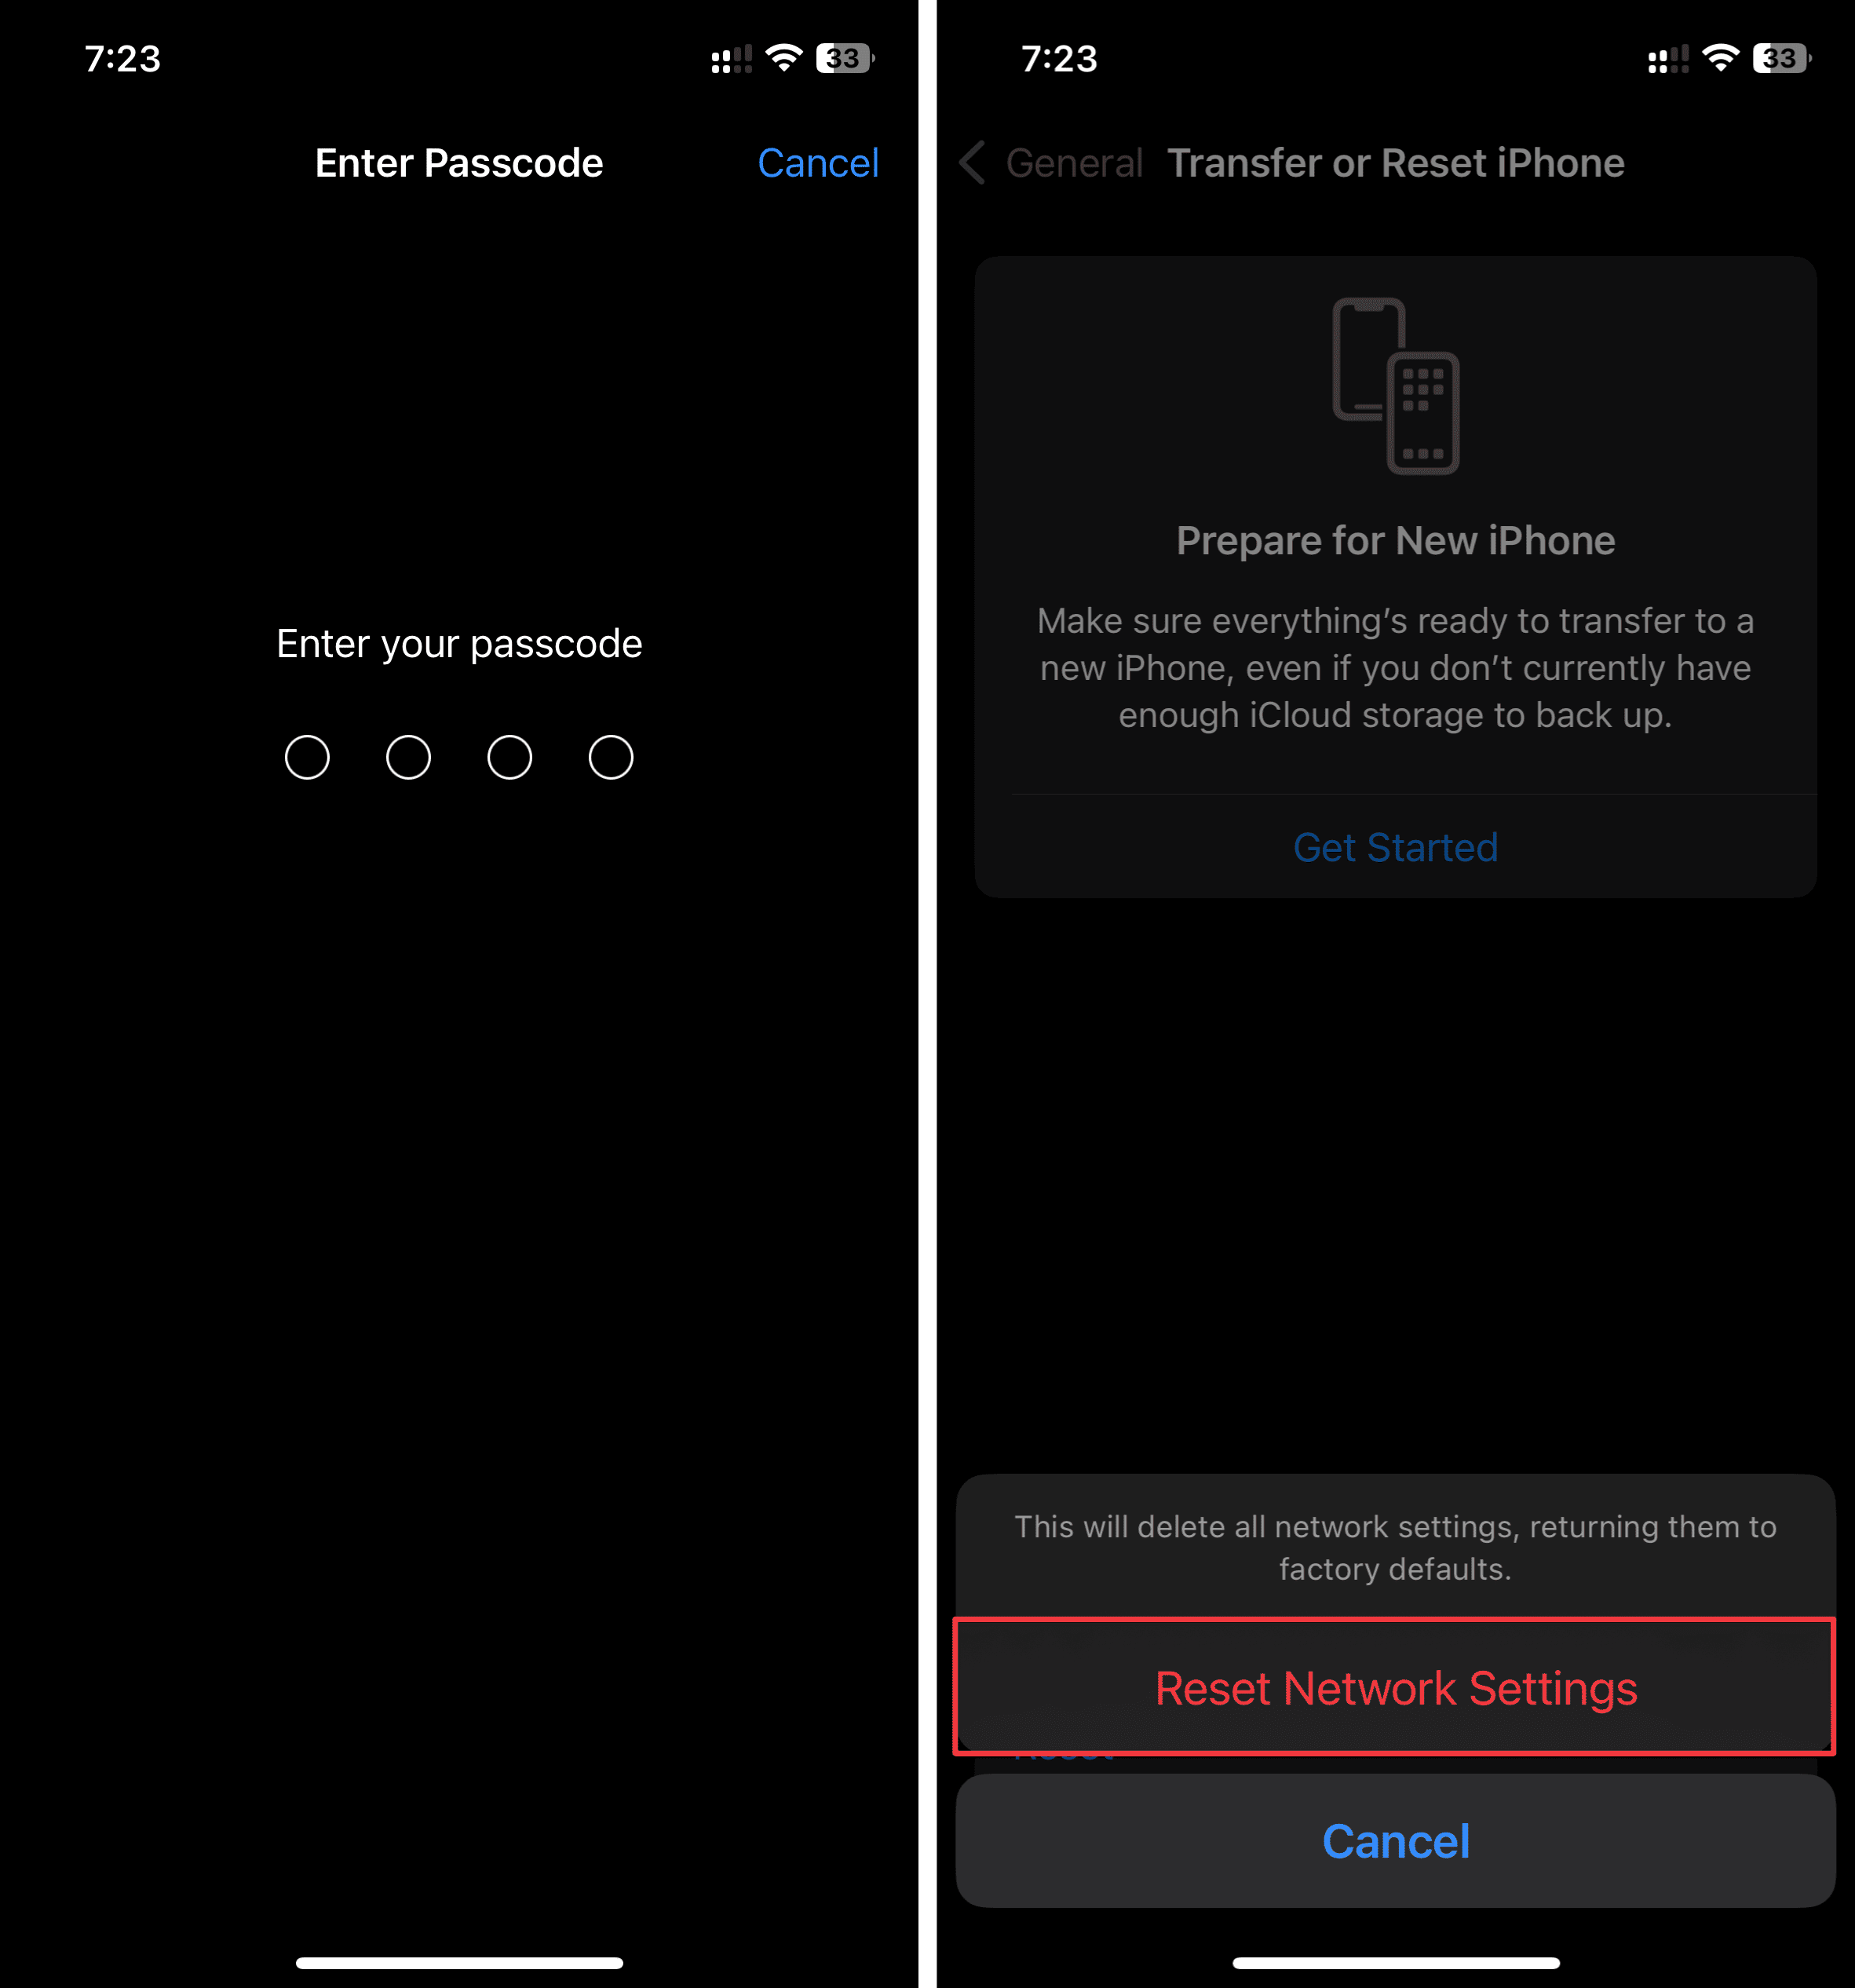 Enter Passcode and select Reset Network Settings